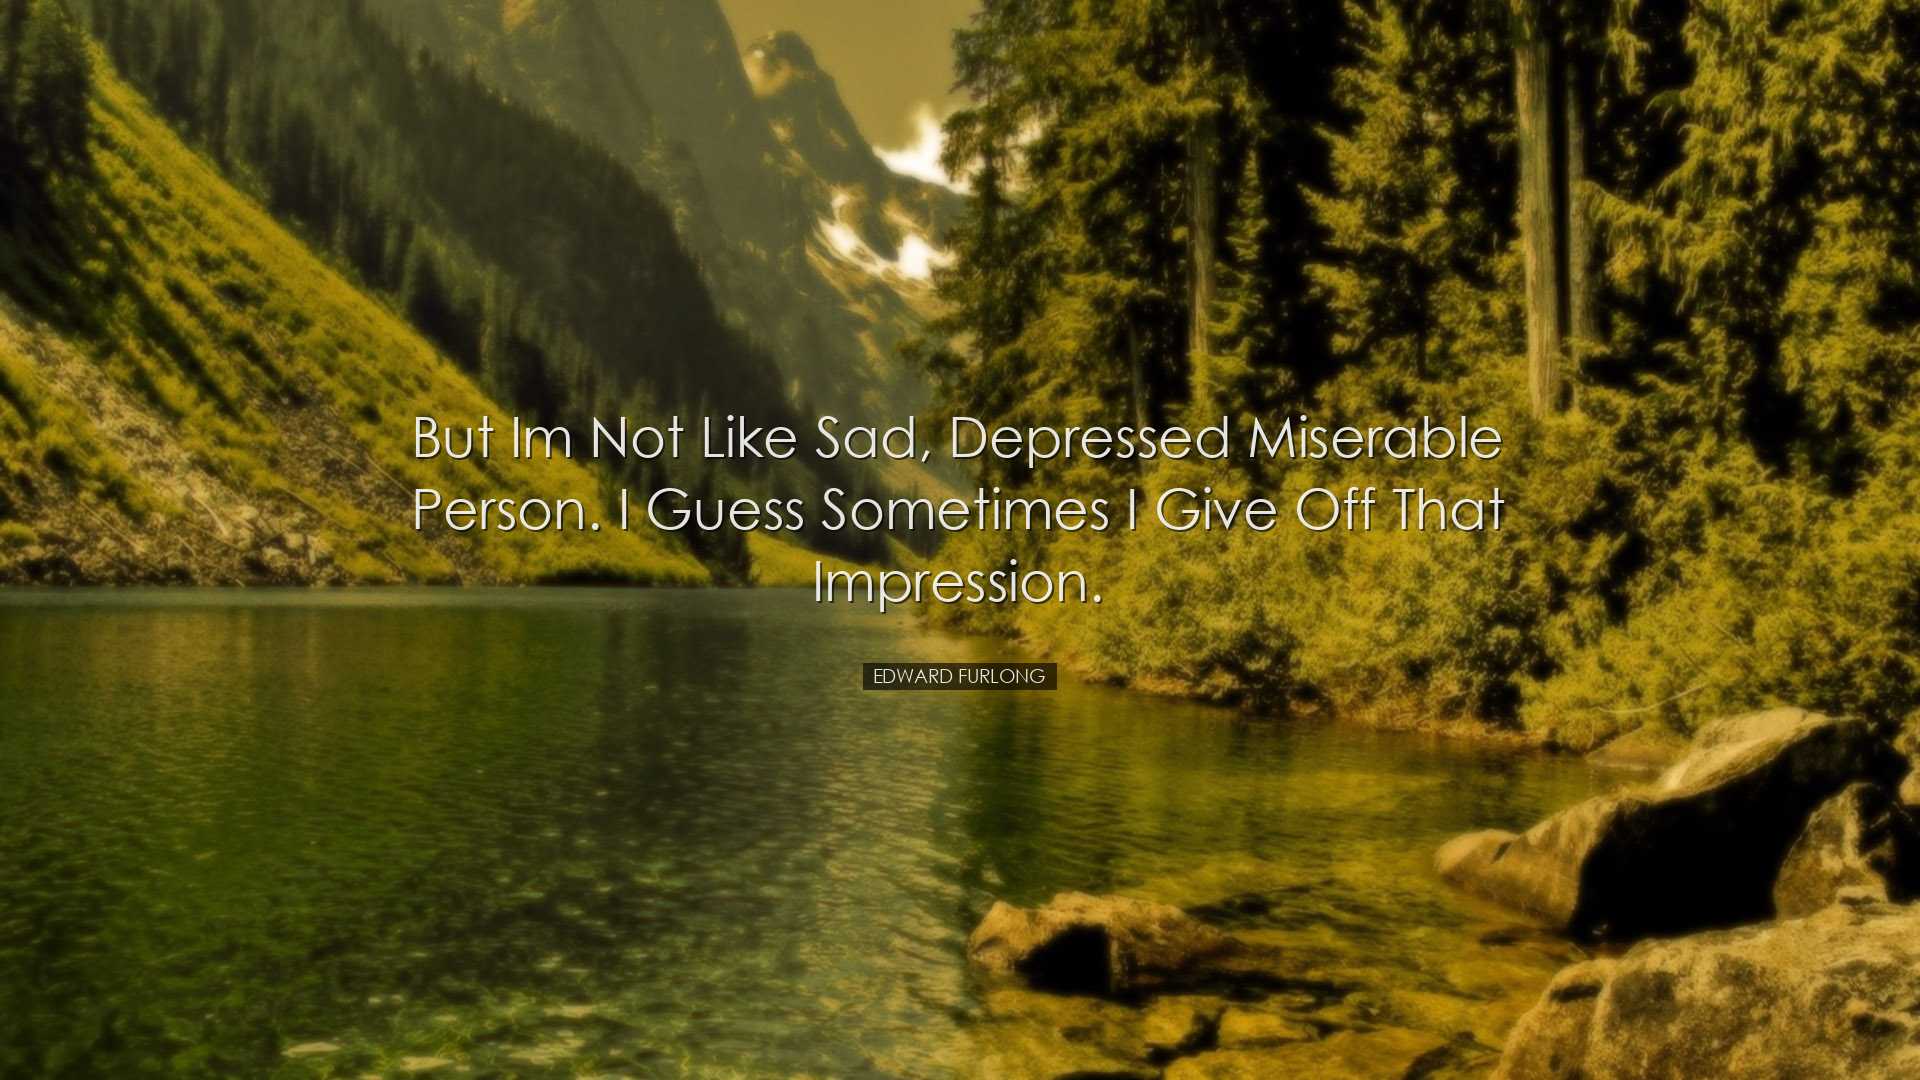 But Im not like sad, depressed miserable person. I guess sometimes